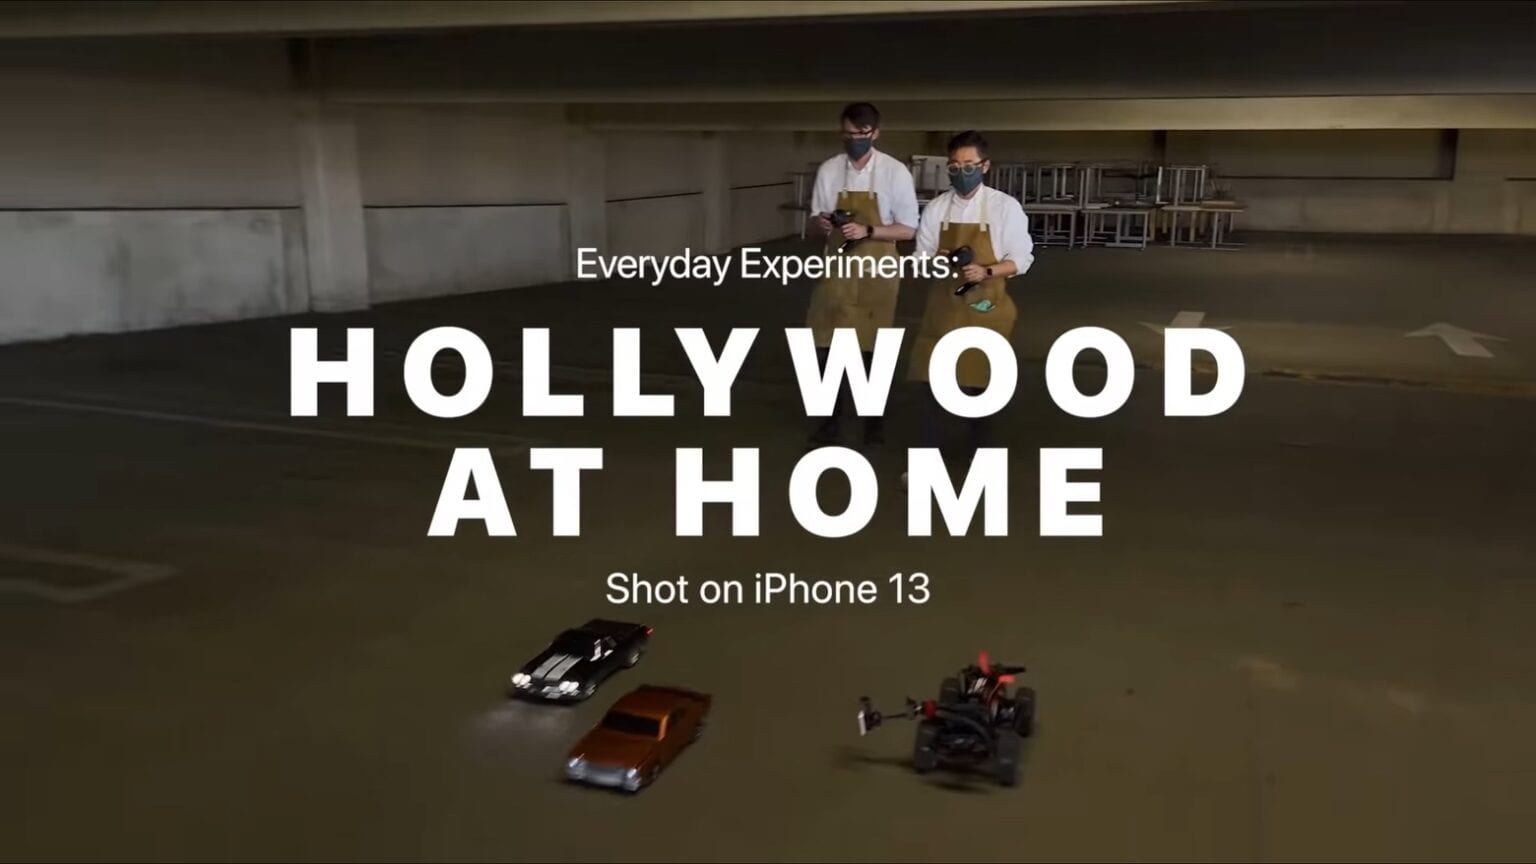 ‘Hollywood at Home’ video demonstrates filming big scenes with tiny props and iPhone 13